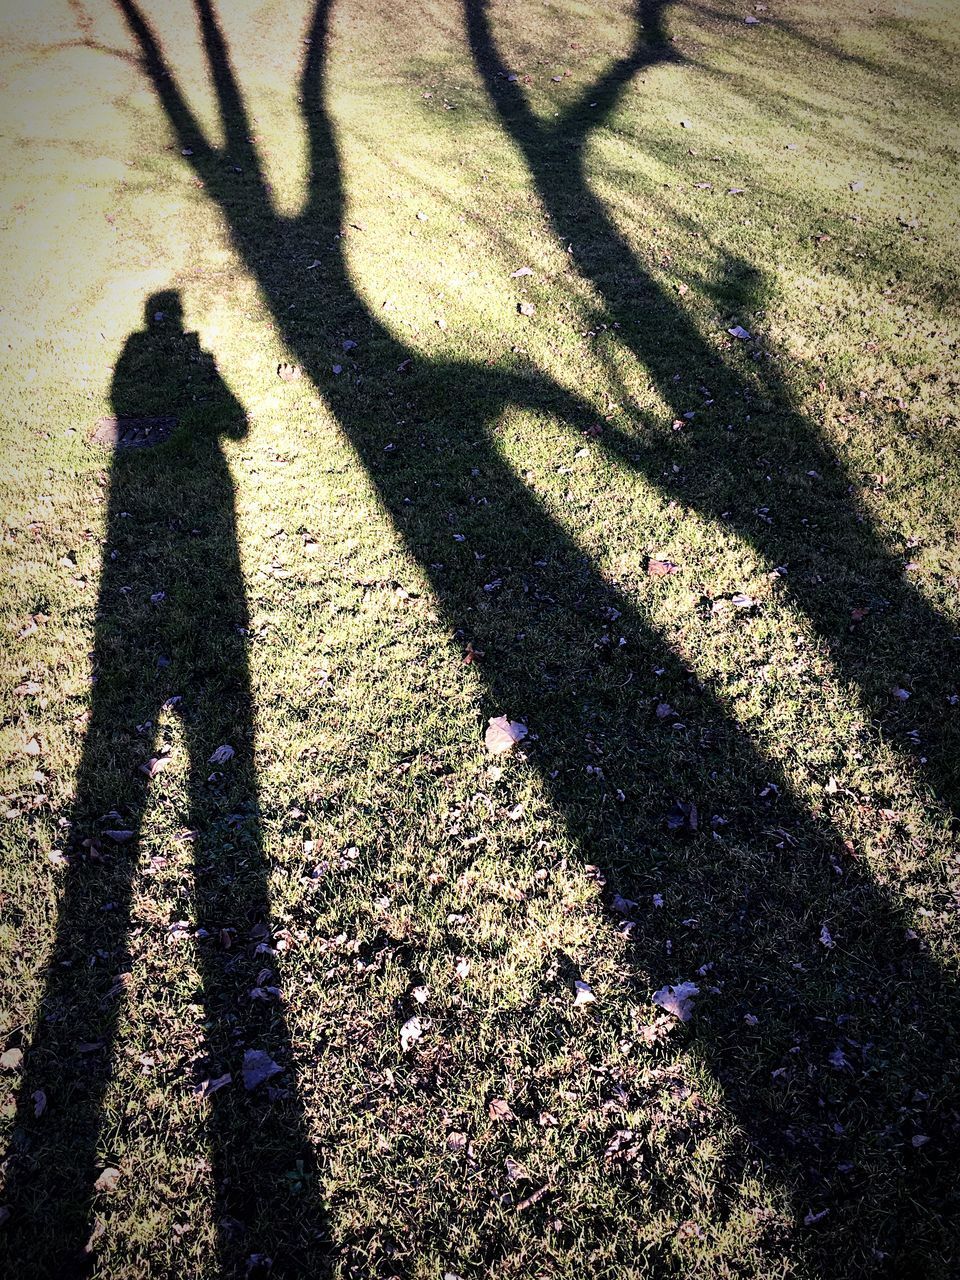 SHADOW OF MAN AND PERSON STANDING ON GRASS